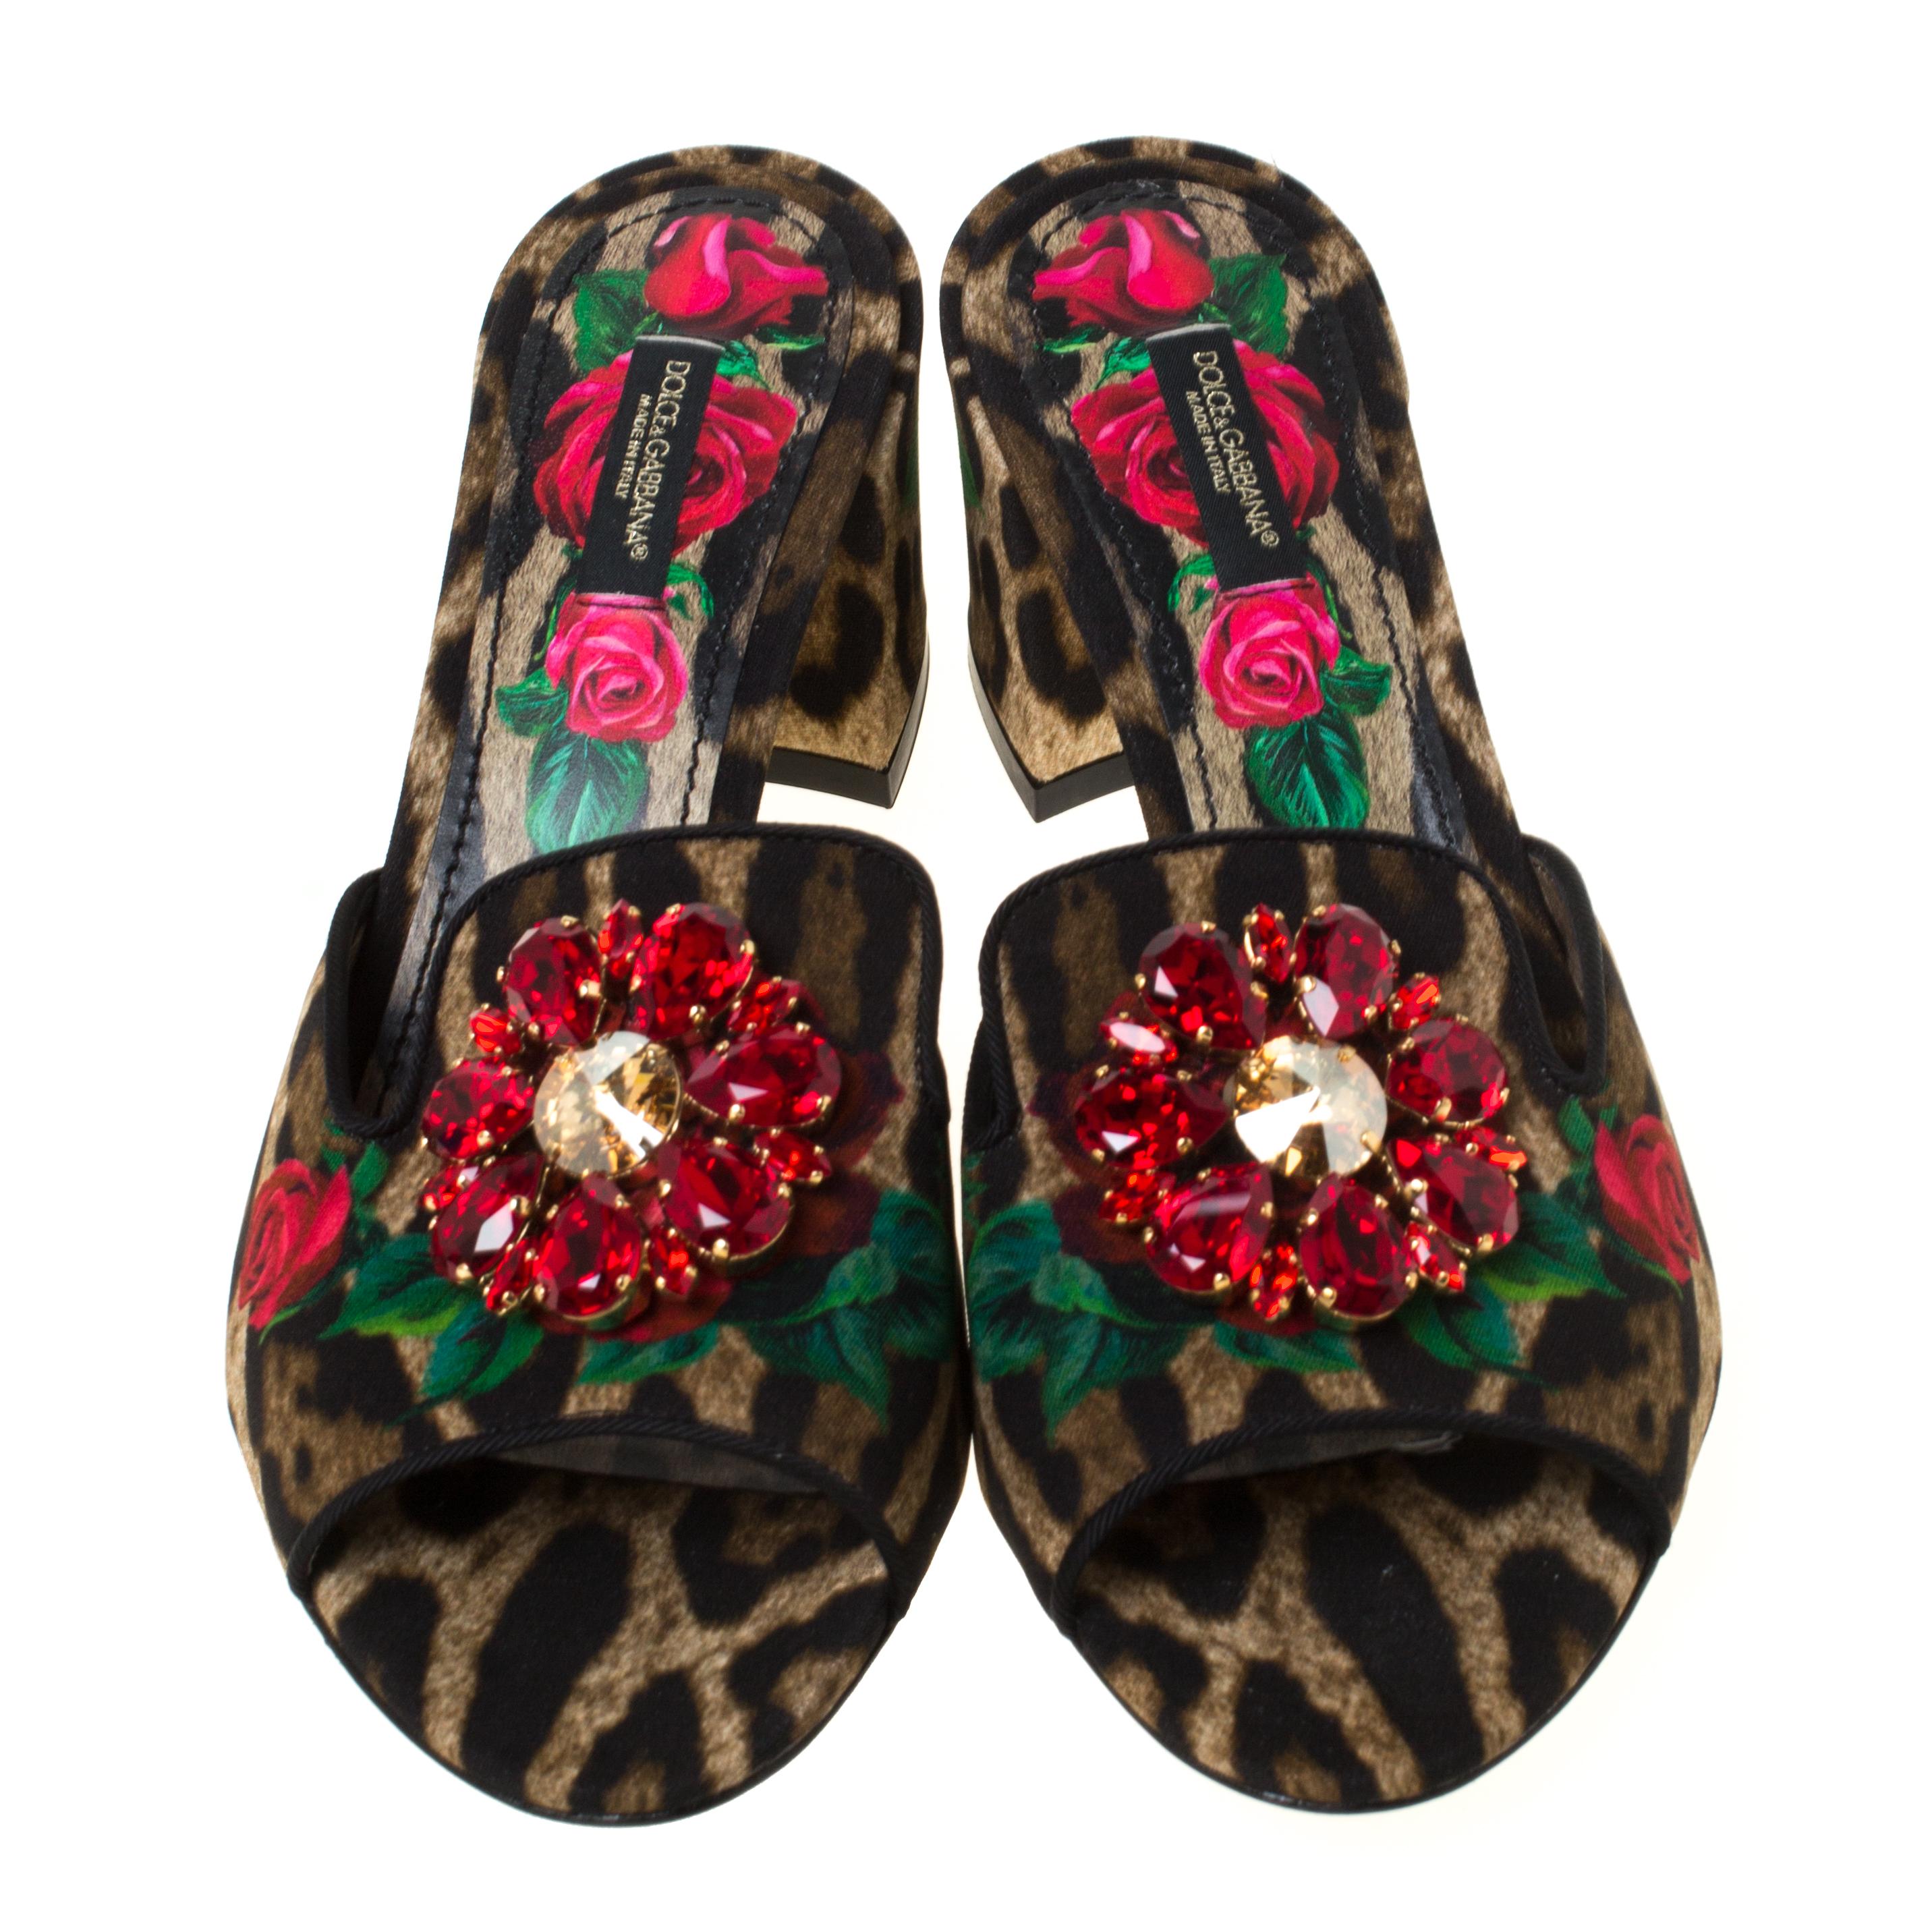 A pair to admire and treasure is this one by Dolce & Gabbana. On the canvas mules, one can see the vibrant and intricate burst of floral and animal prints. They have crystal-embellished uppers, open toes and 7.5 cm heels.

Includes: Original